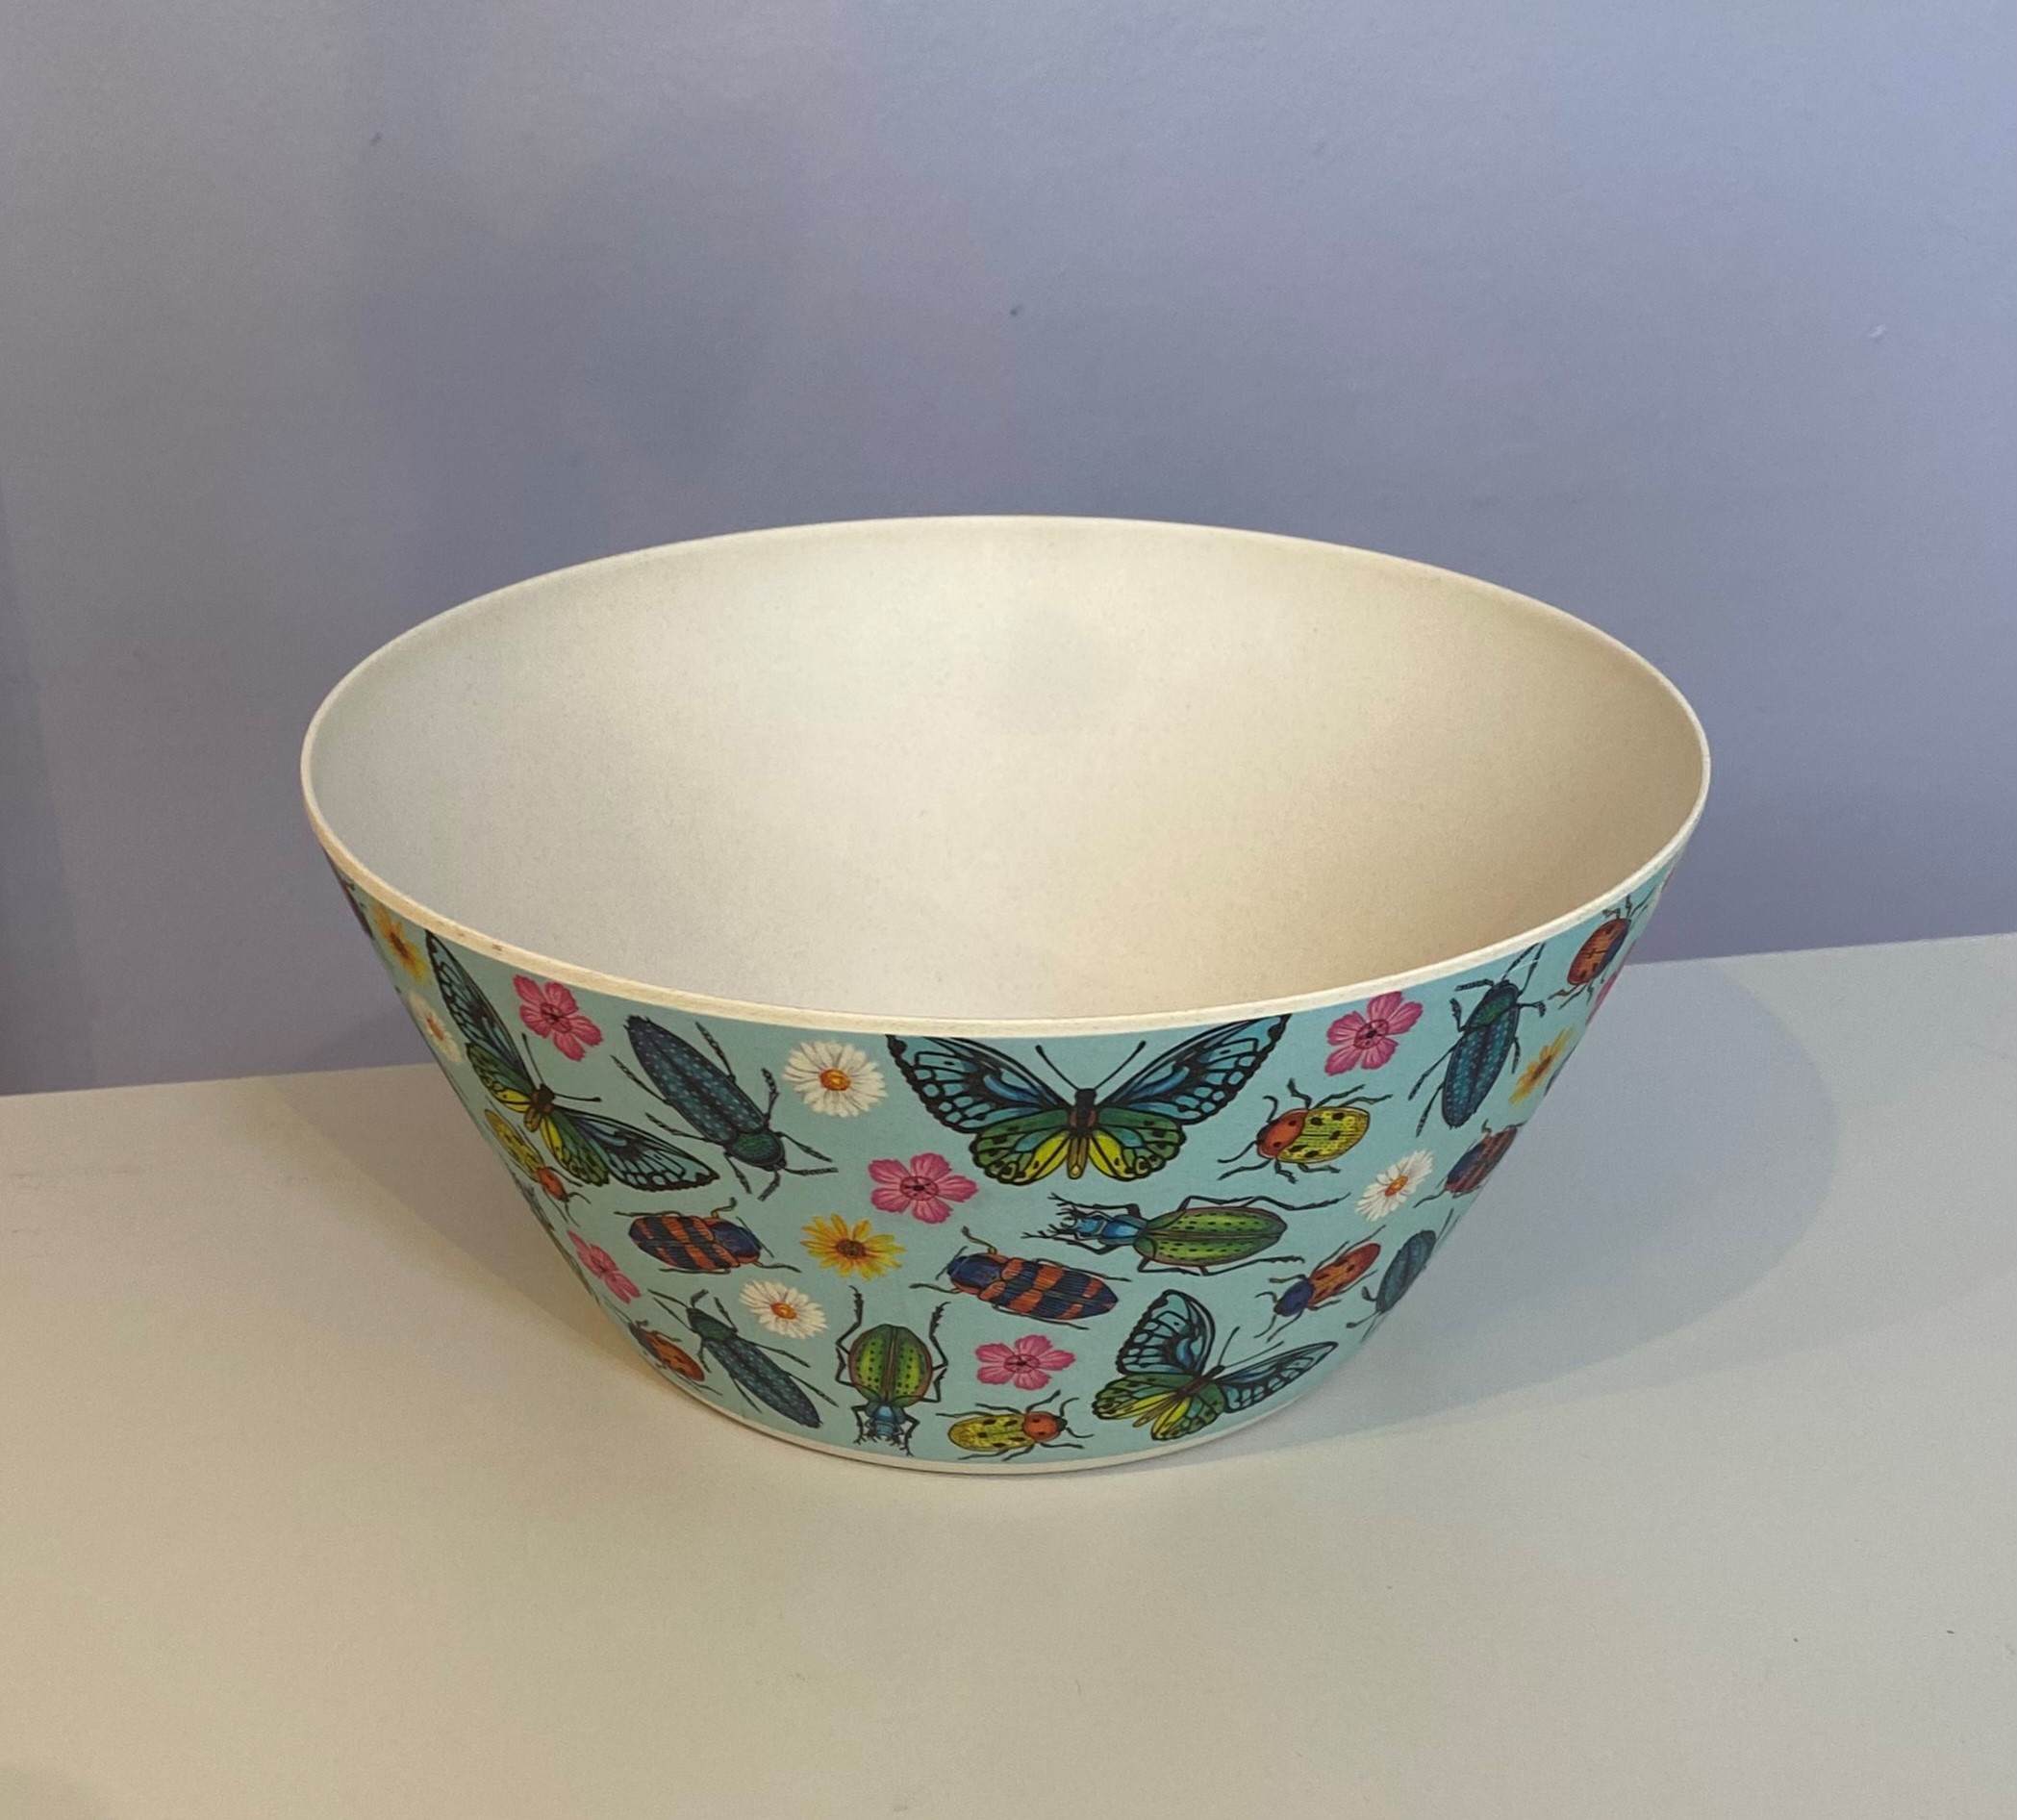 https://www.conamore.co.uk/wp-content/uploads/2022/03/Bugs-and-butterflies-bowl.jpg